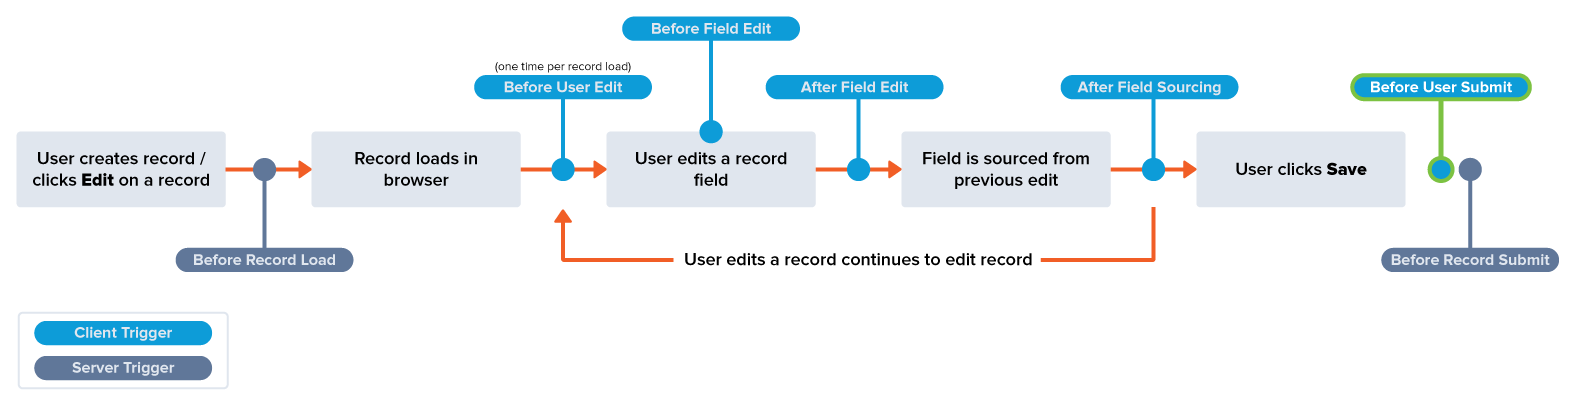 A diagram showing common record edit events and when the Before User Submit trigger executes.